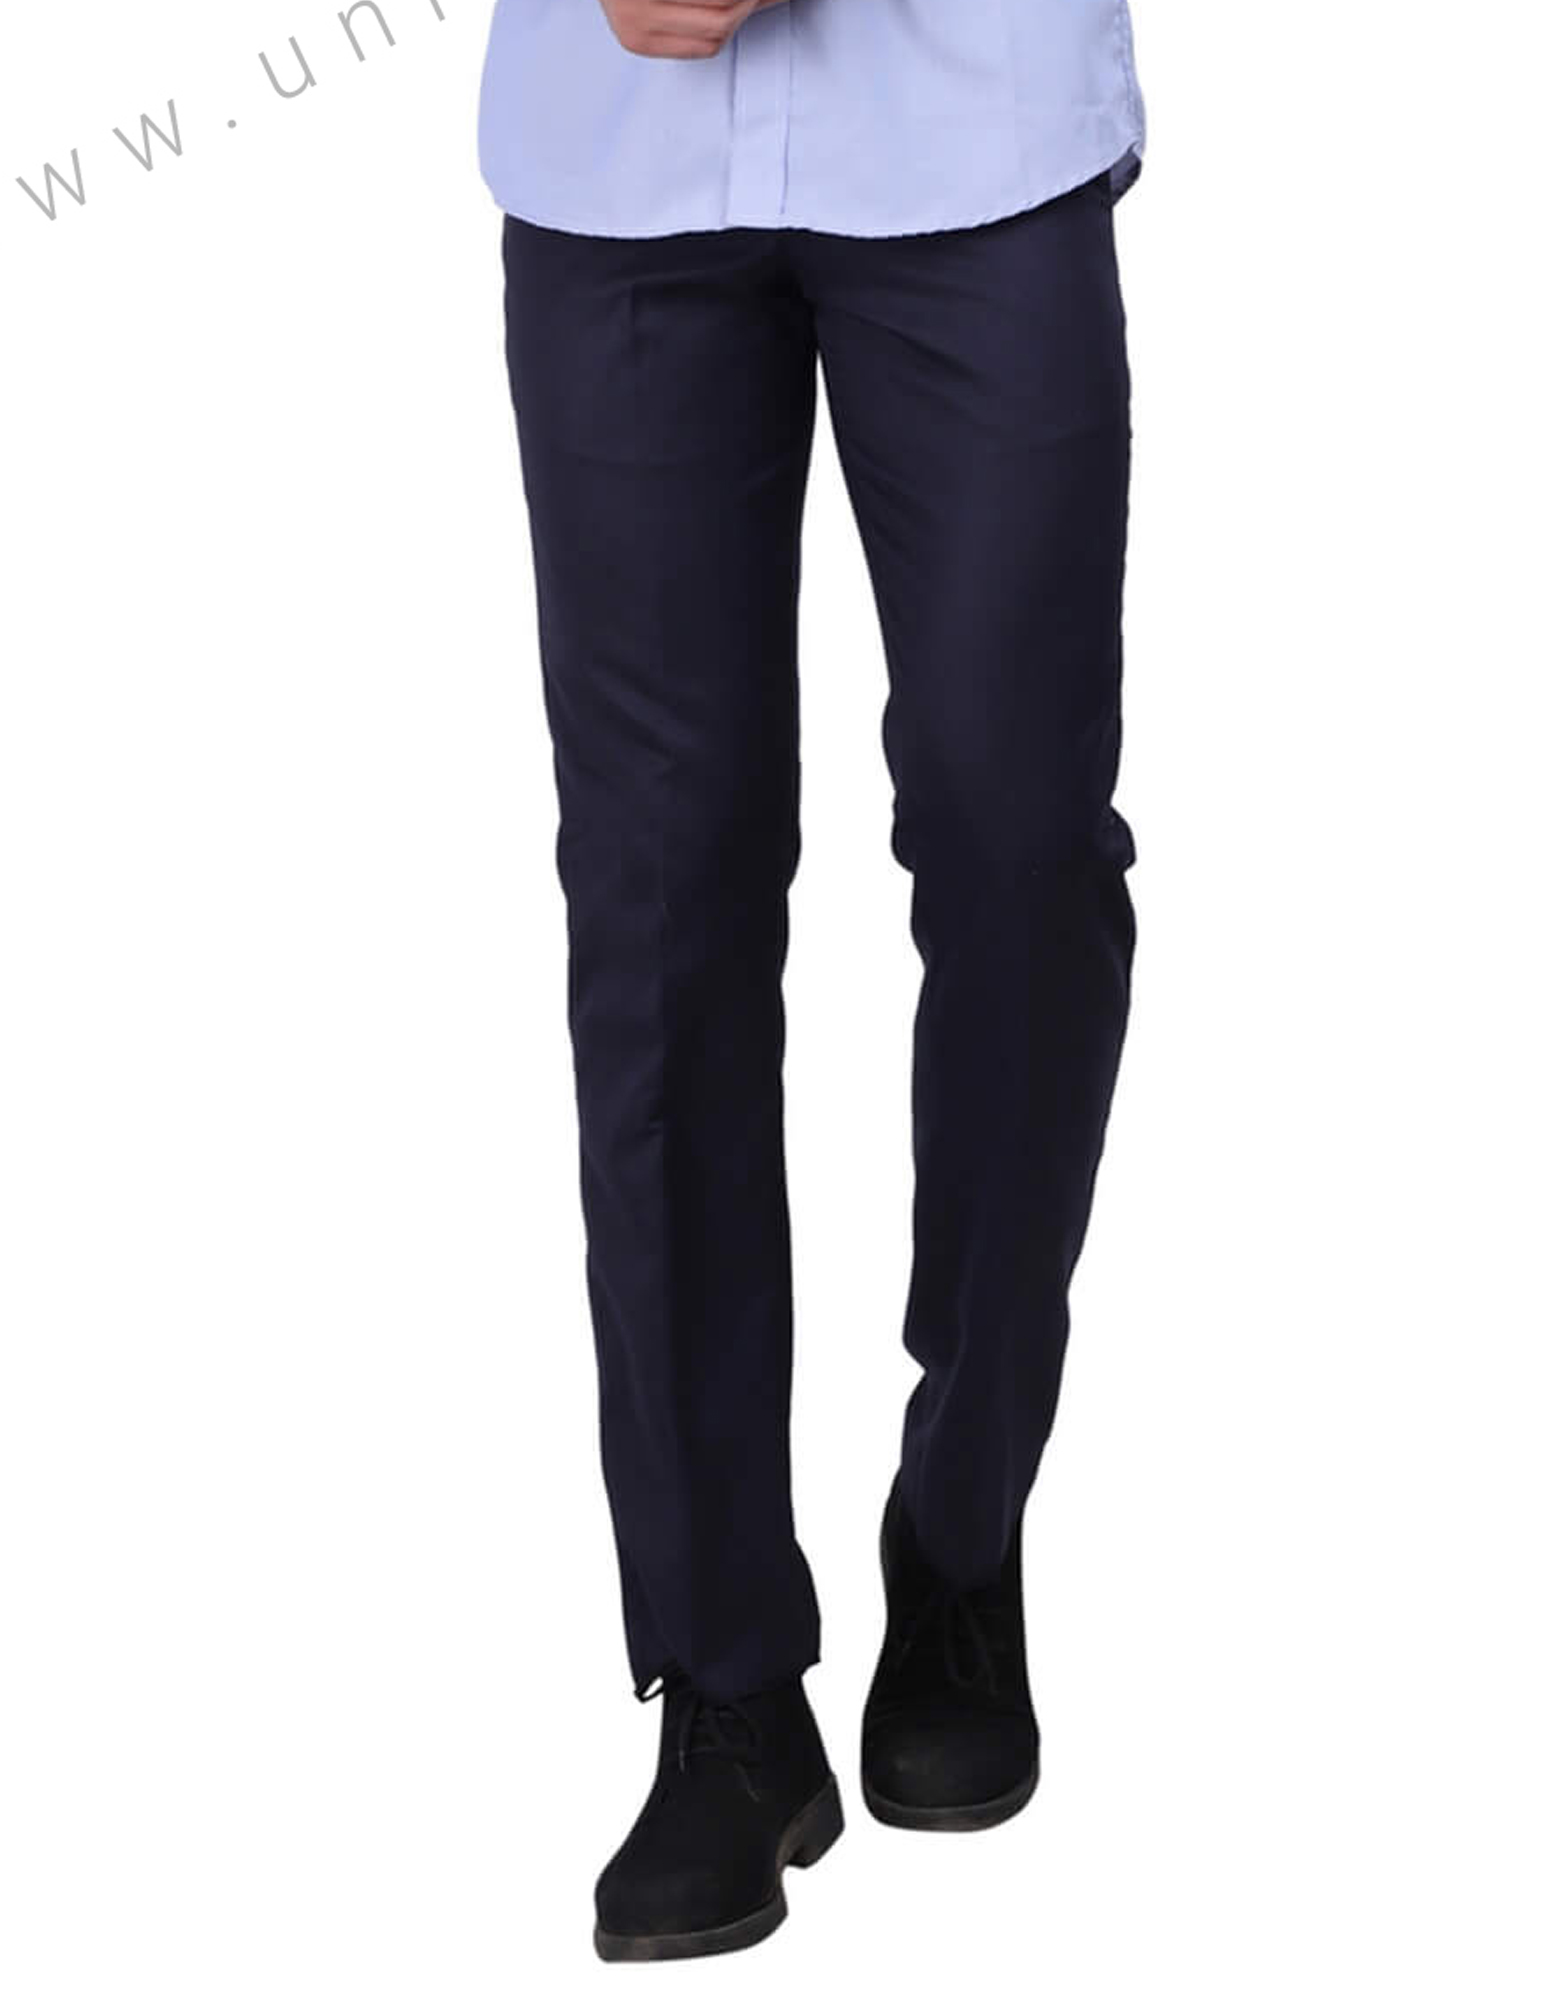 Buy Navy Blue Trousers  Pants for Men by ALTHEORY Online  Ajiocom